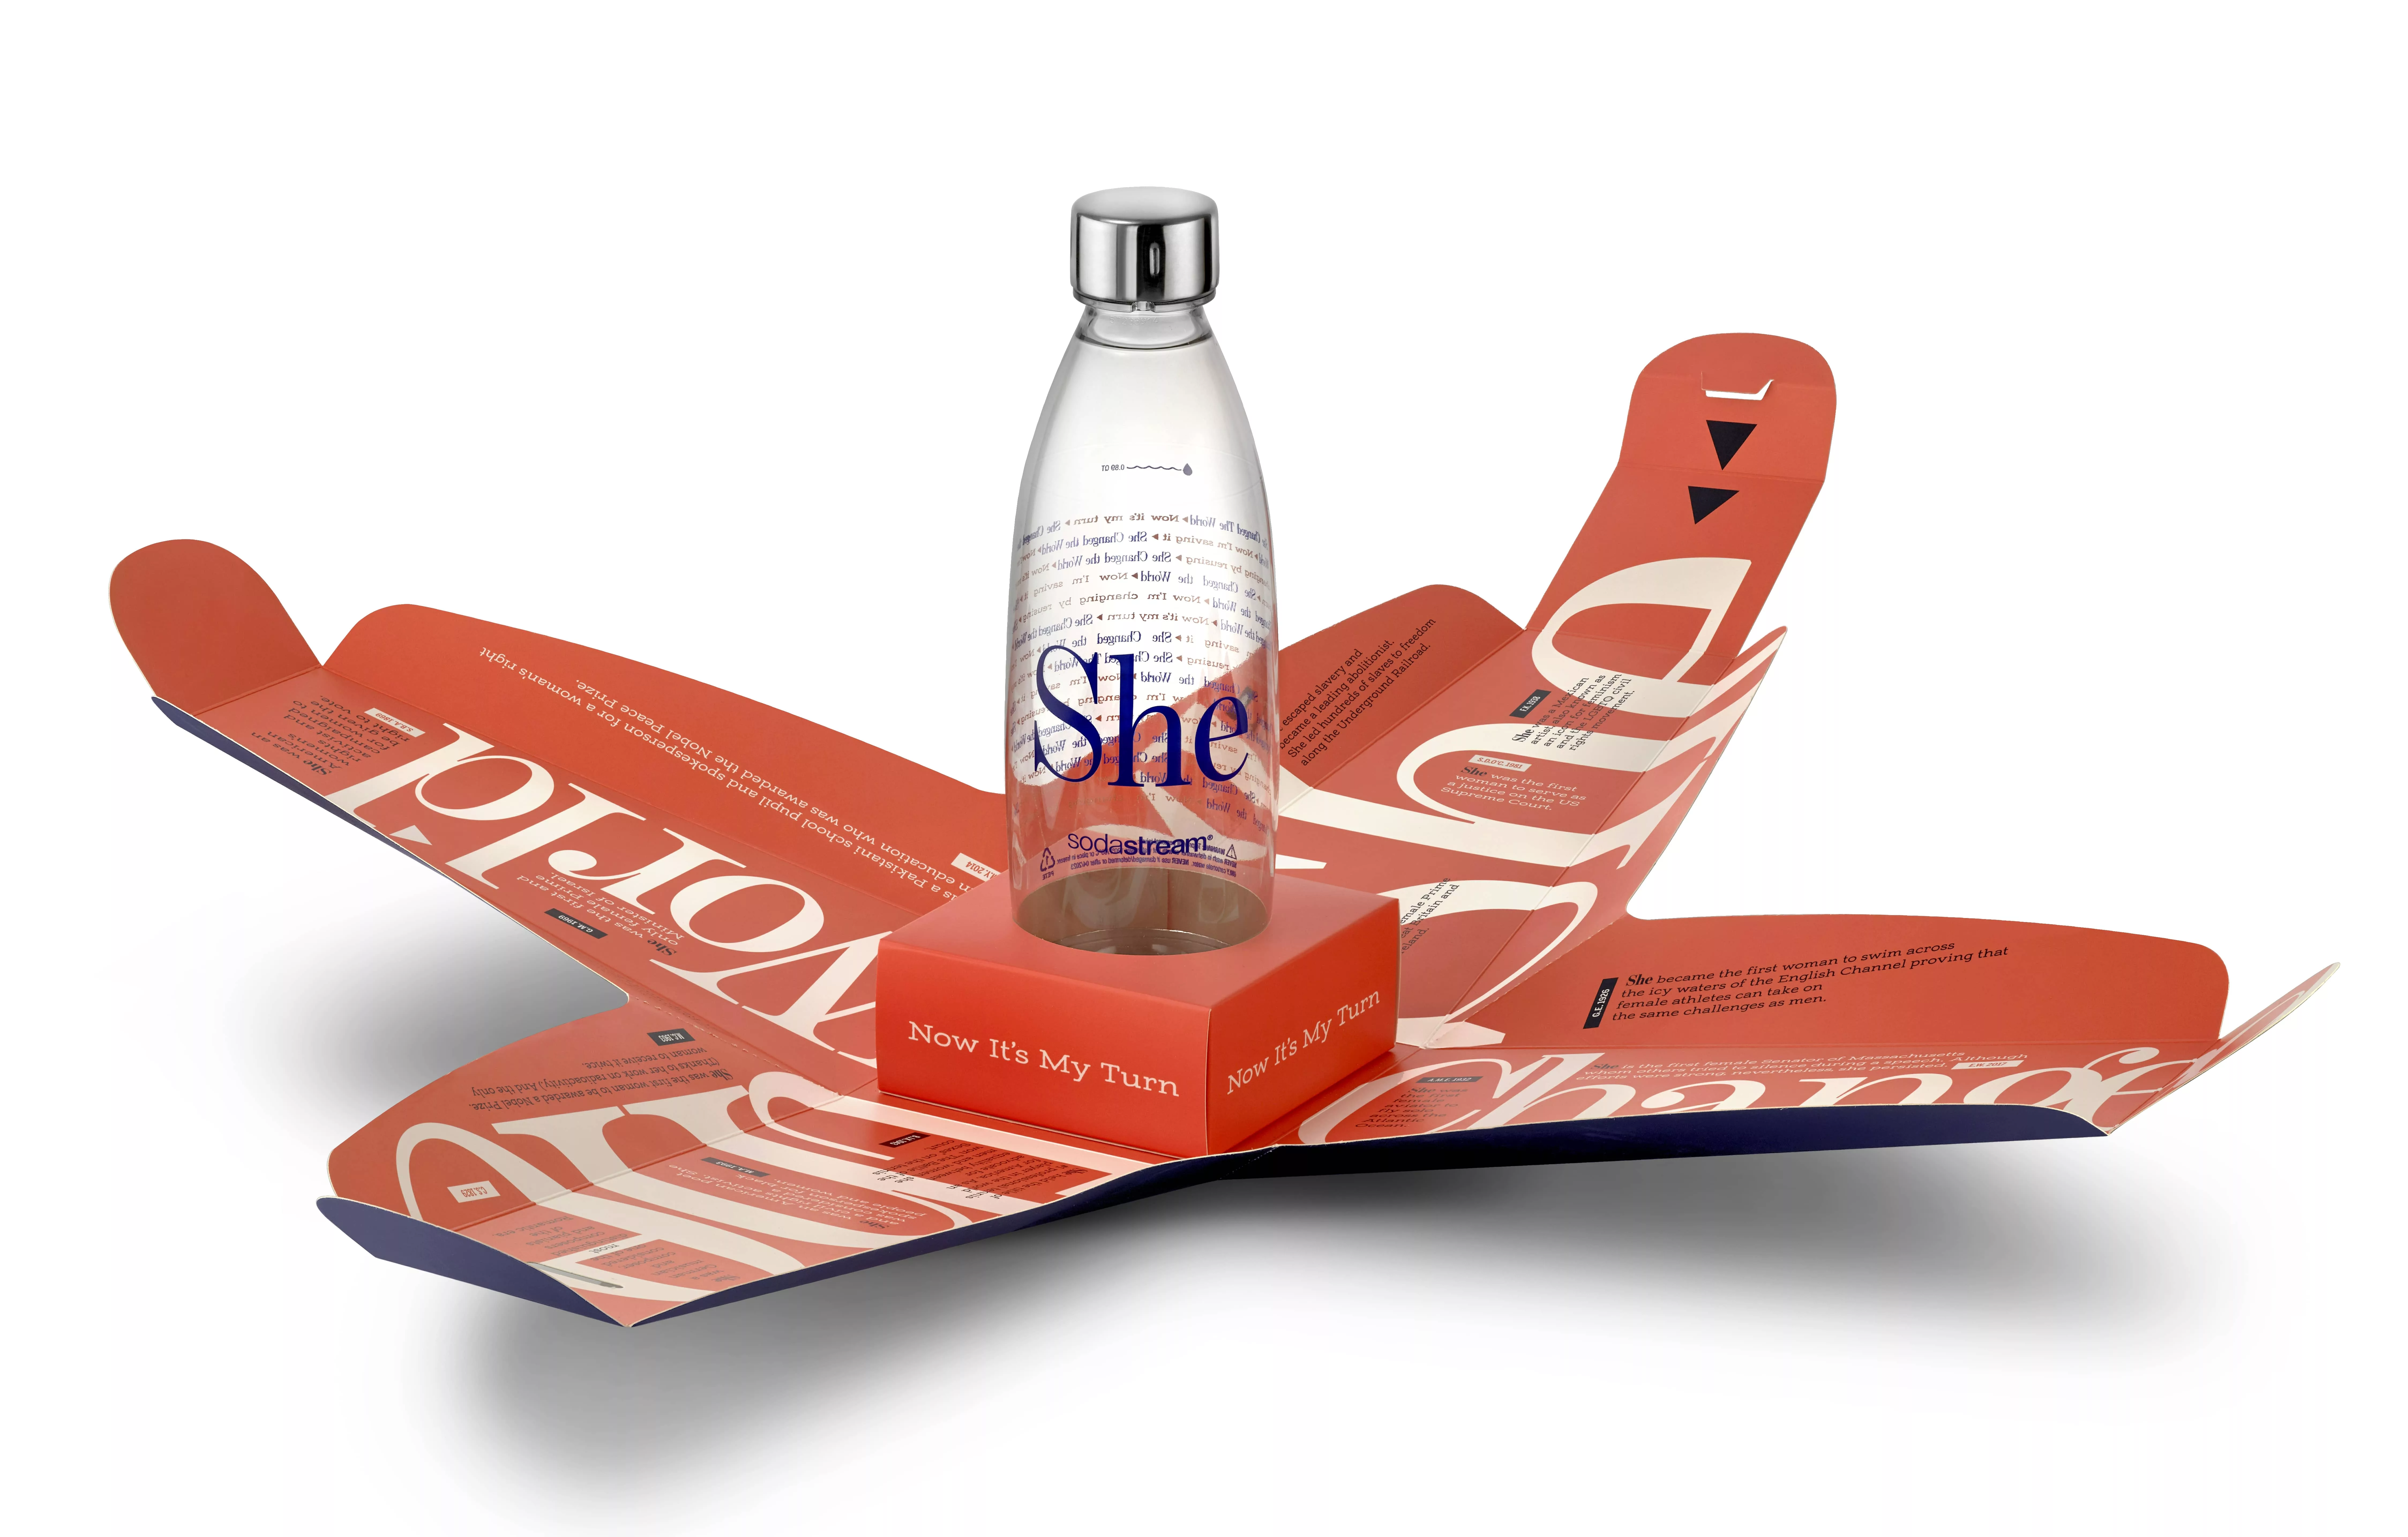 Reusable water bottle with empowering "She" design on opened cardboard packaging